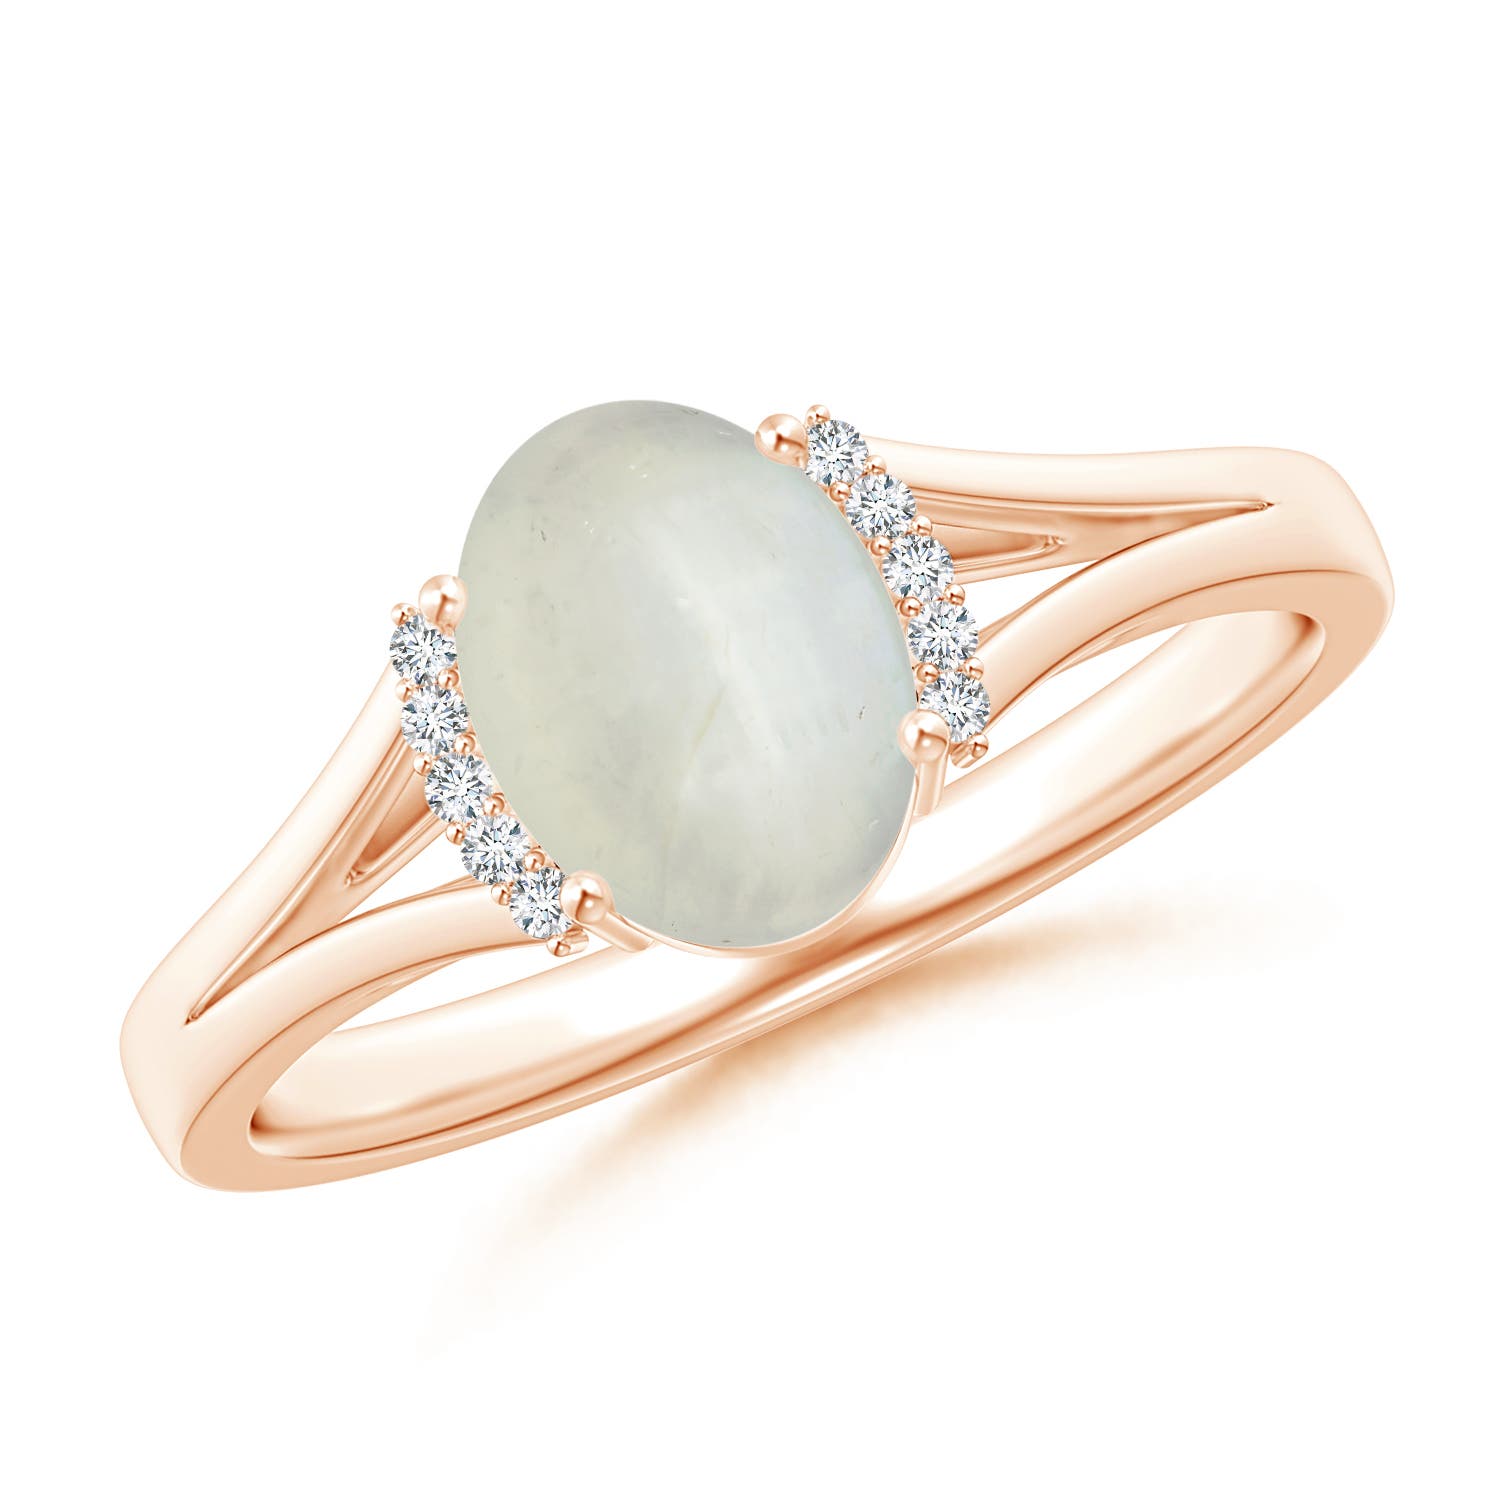 AA - Moonstone / 1.15 CT / 14 KT Rose Gold